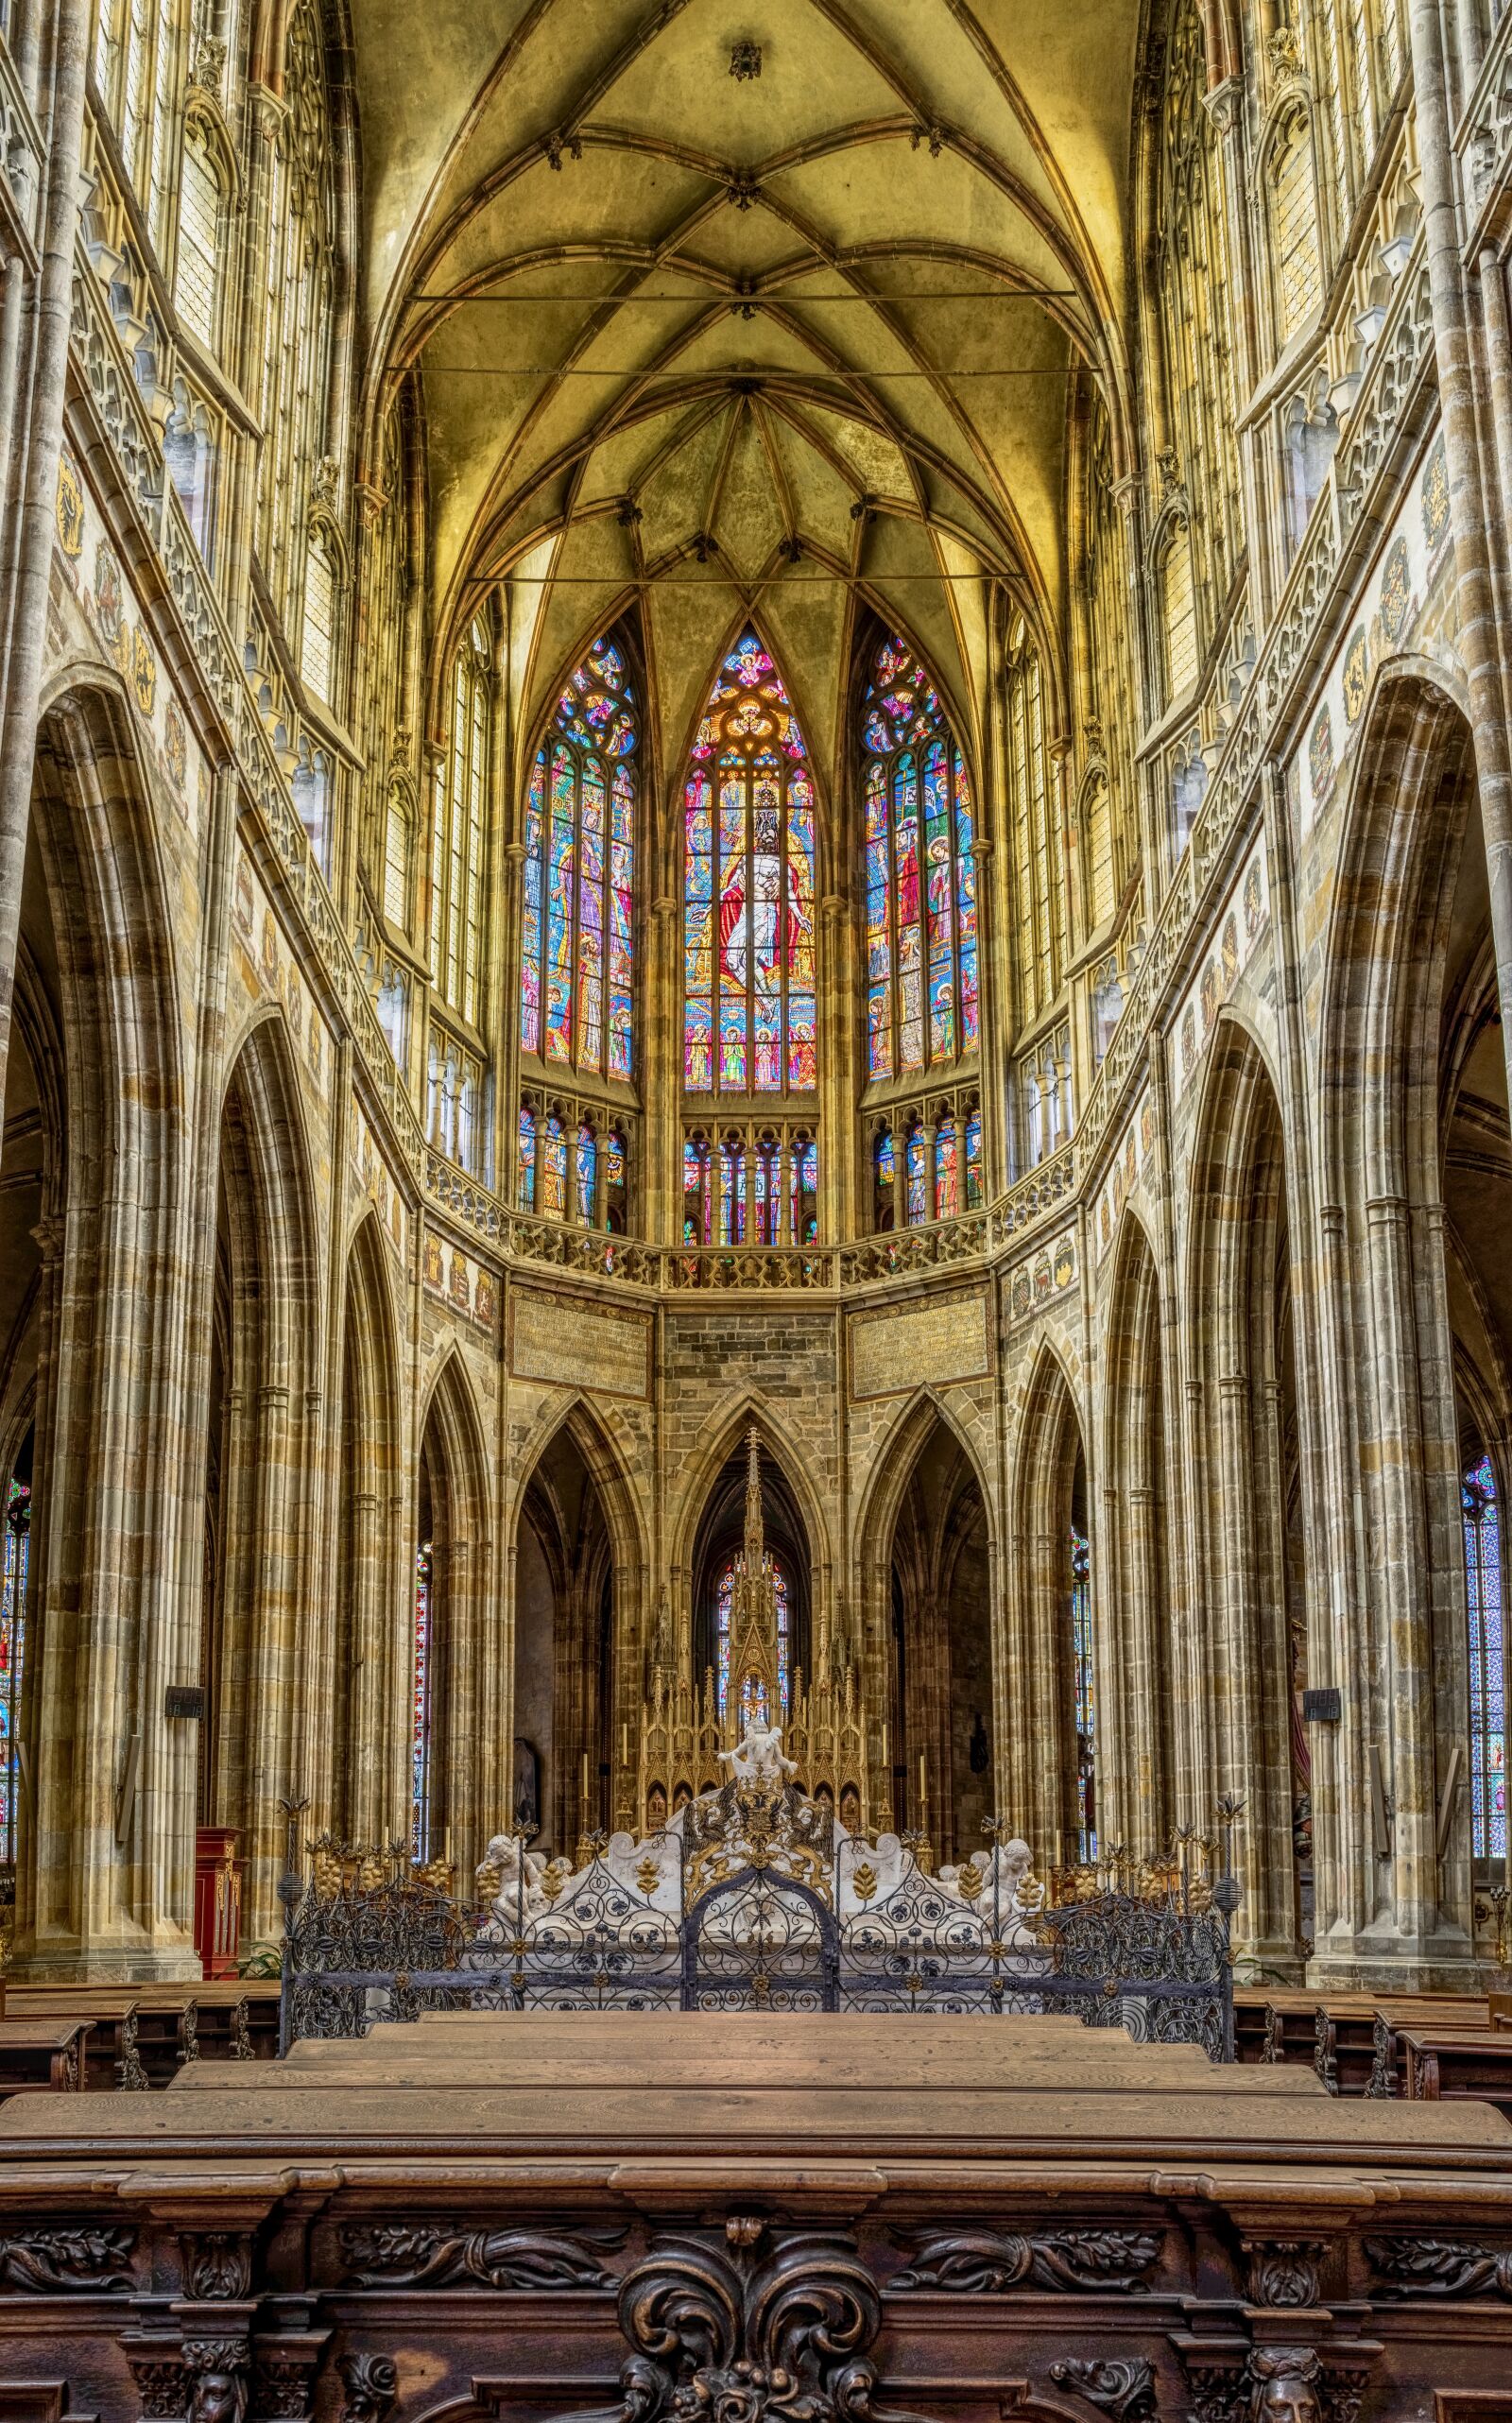 Sony a6300 sample photo. St vitus cathedral, church photography